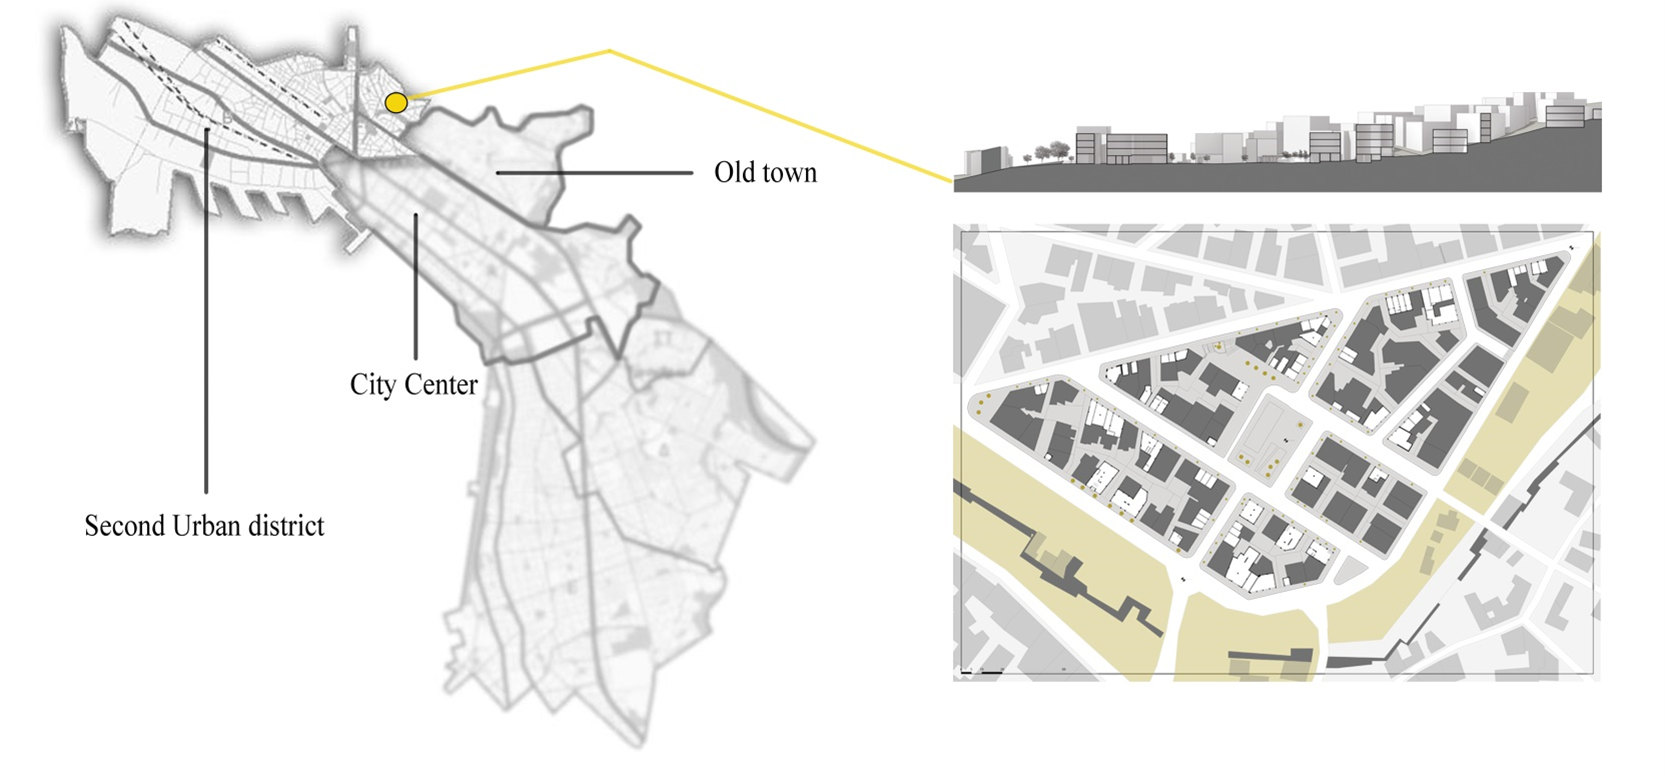 Figure 4: Plan view of the area and the neighborhood of the study